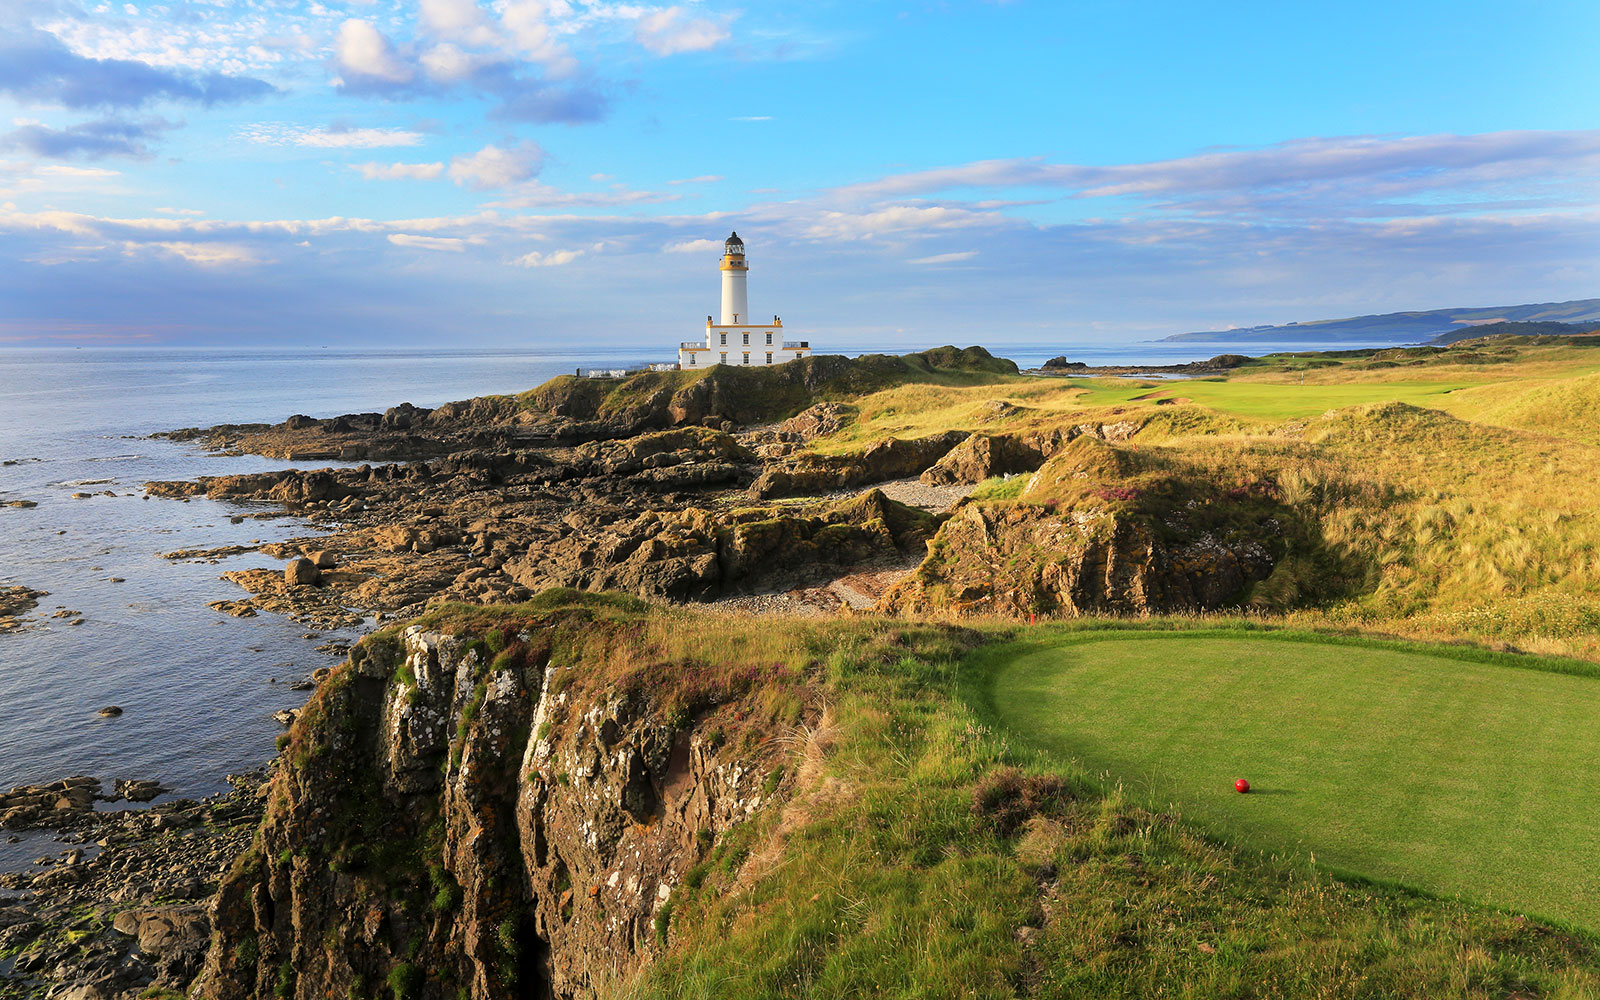 Turnberry has undergone a facelift but remains a photographic gem.